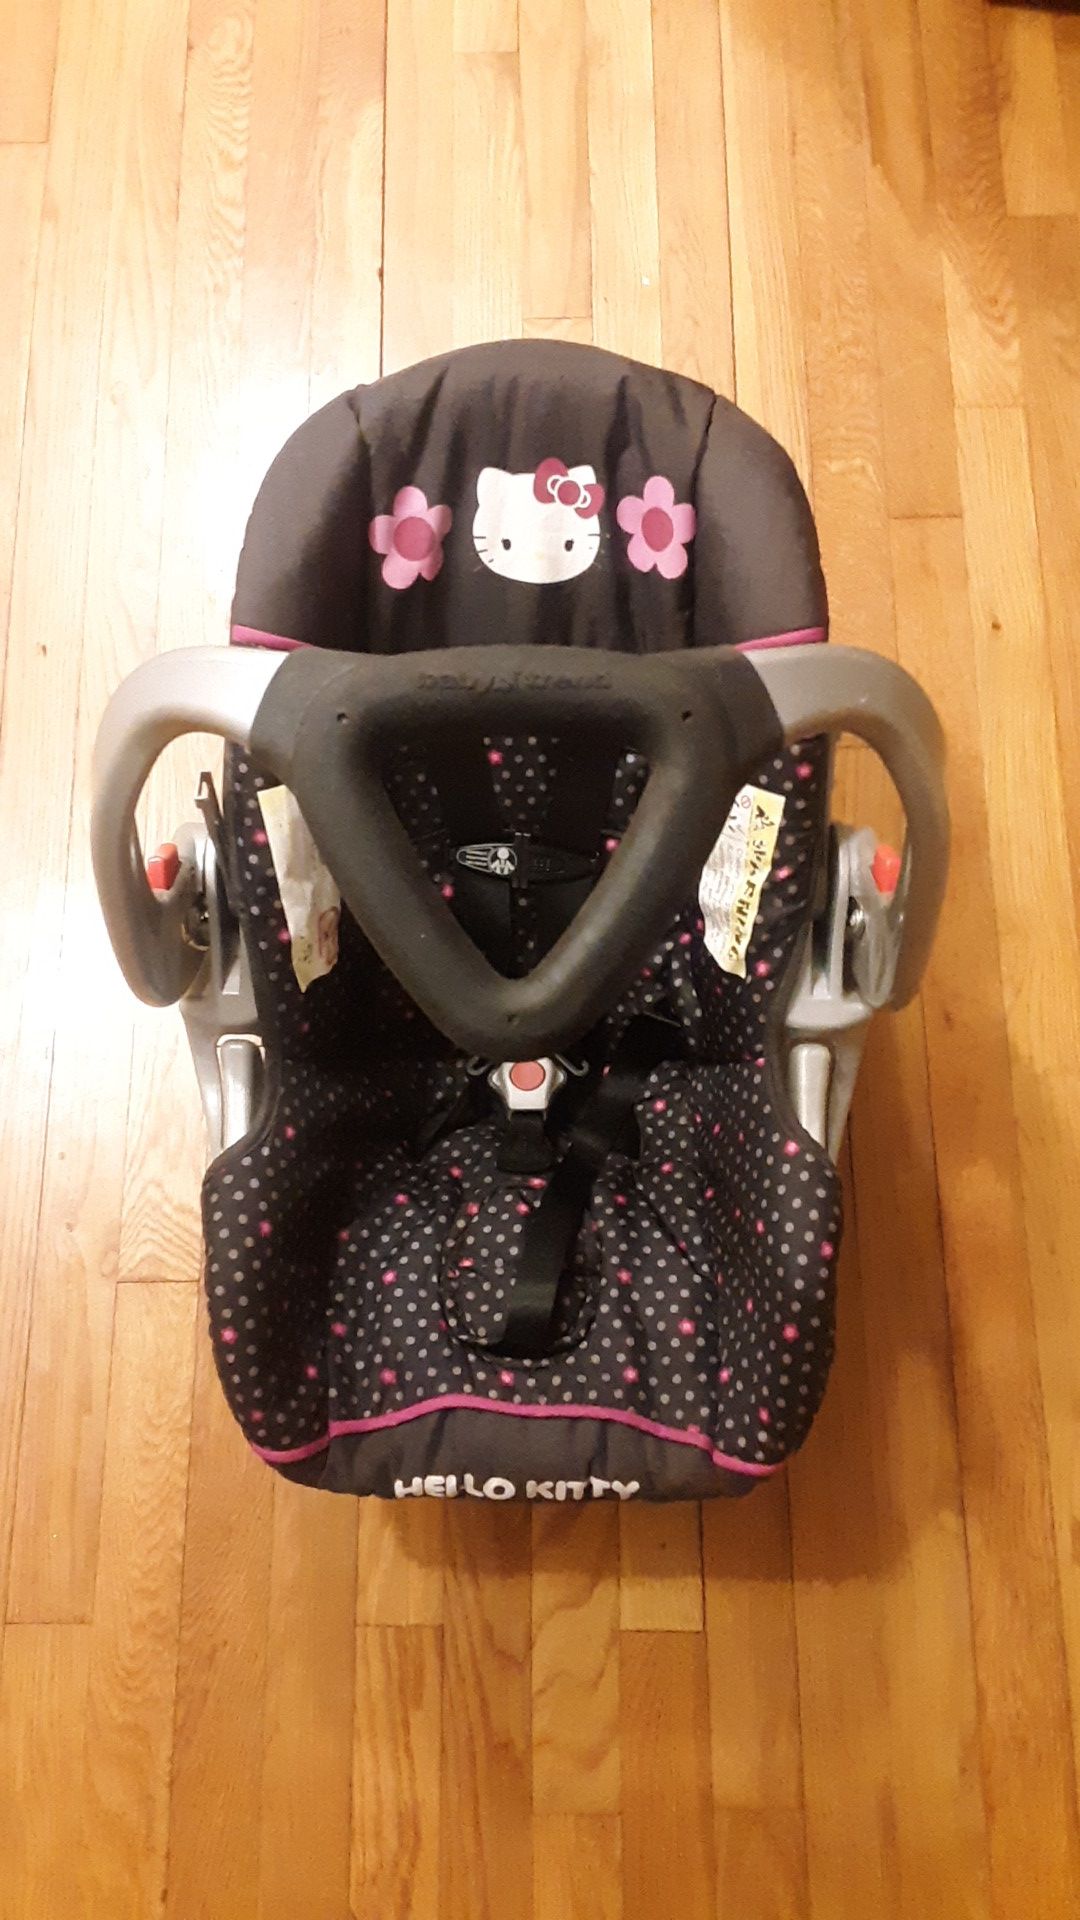 Hello Kitty and Peg Perego Infants car seat